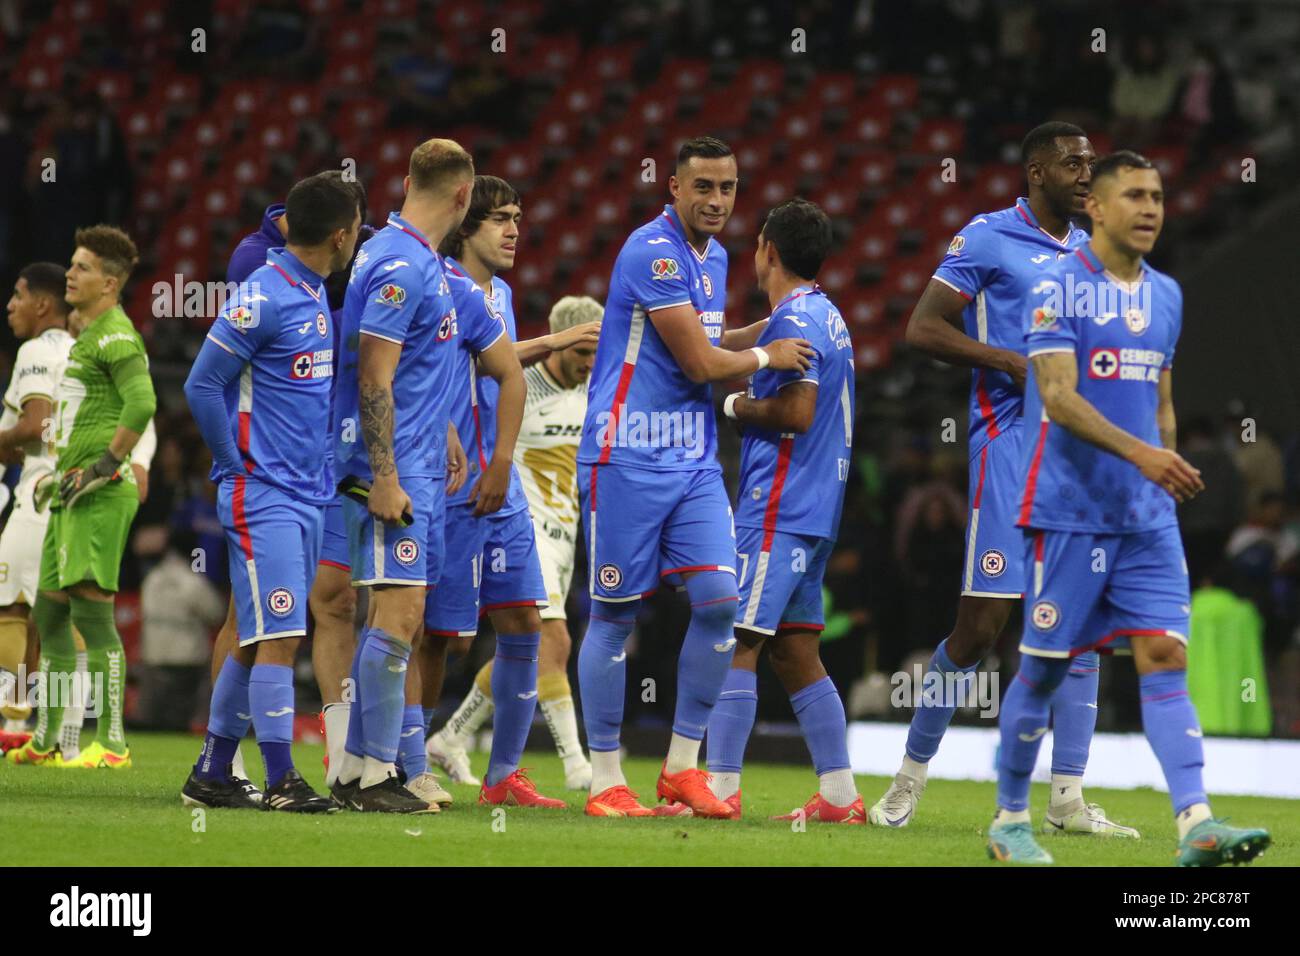 March 11, 2023, Mexico City, Mexico: Cruz Azul team, during the match between Cruz Azul and Pumas of the Closing Tournament 2023 at Azteca Stadium. on March 11, 2023 in Mexico City, Mexico. (Photo by Ismael Rosas/ Eyepix Group) Stock Photo